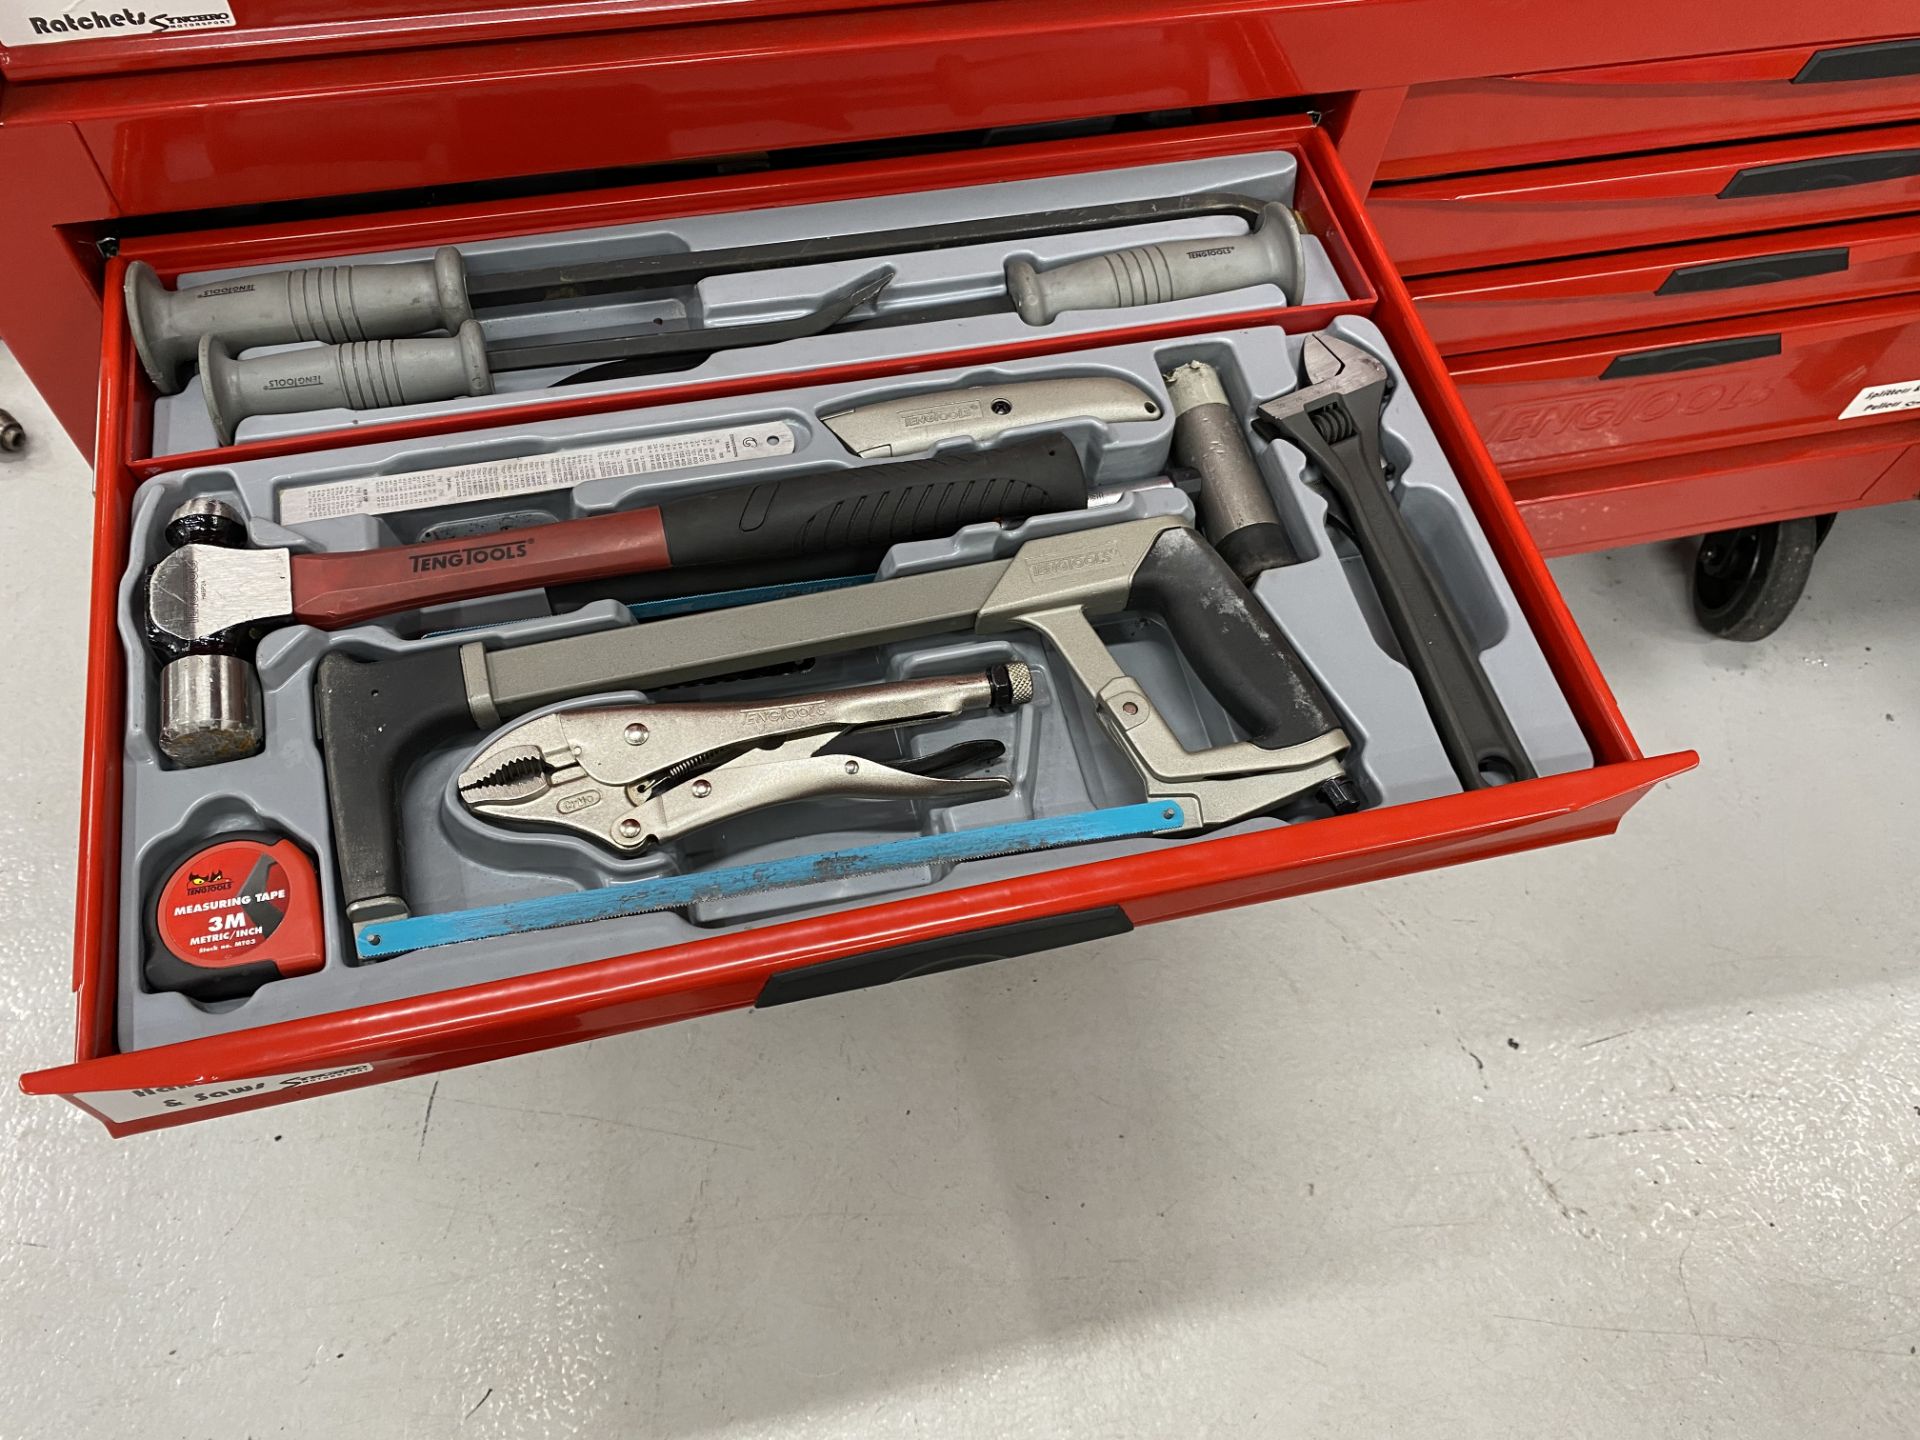 Tengtool box code CMONSTER-02, mobile 9 drawer toolbox with a 10 drawer top box toolbox, including - Image 17 of 24